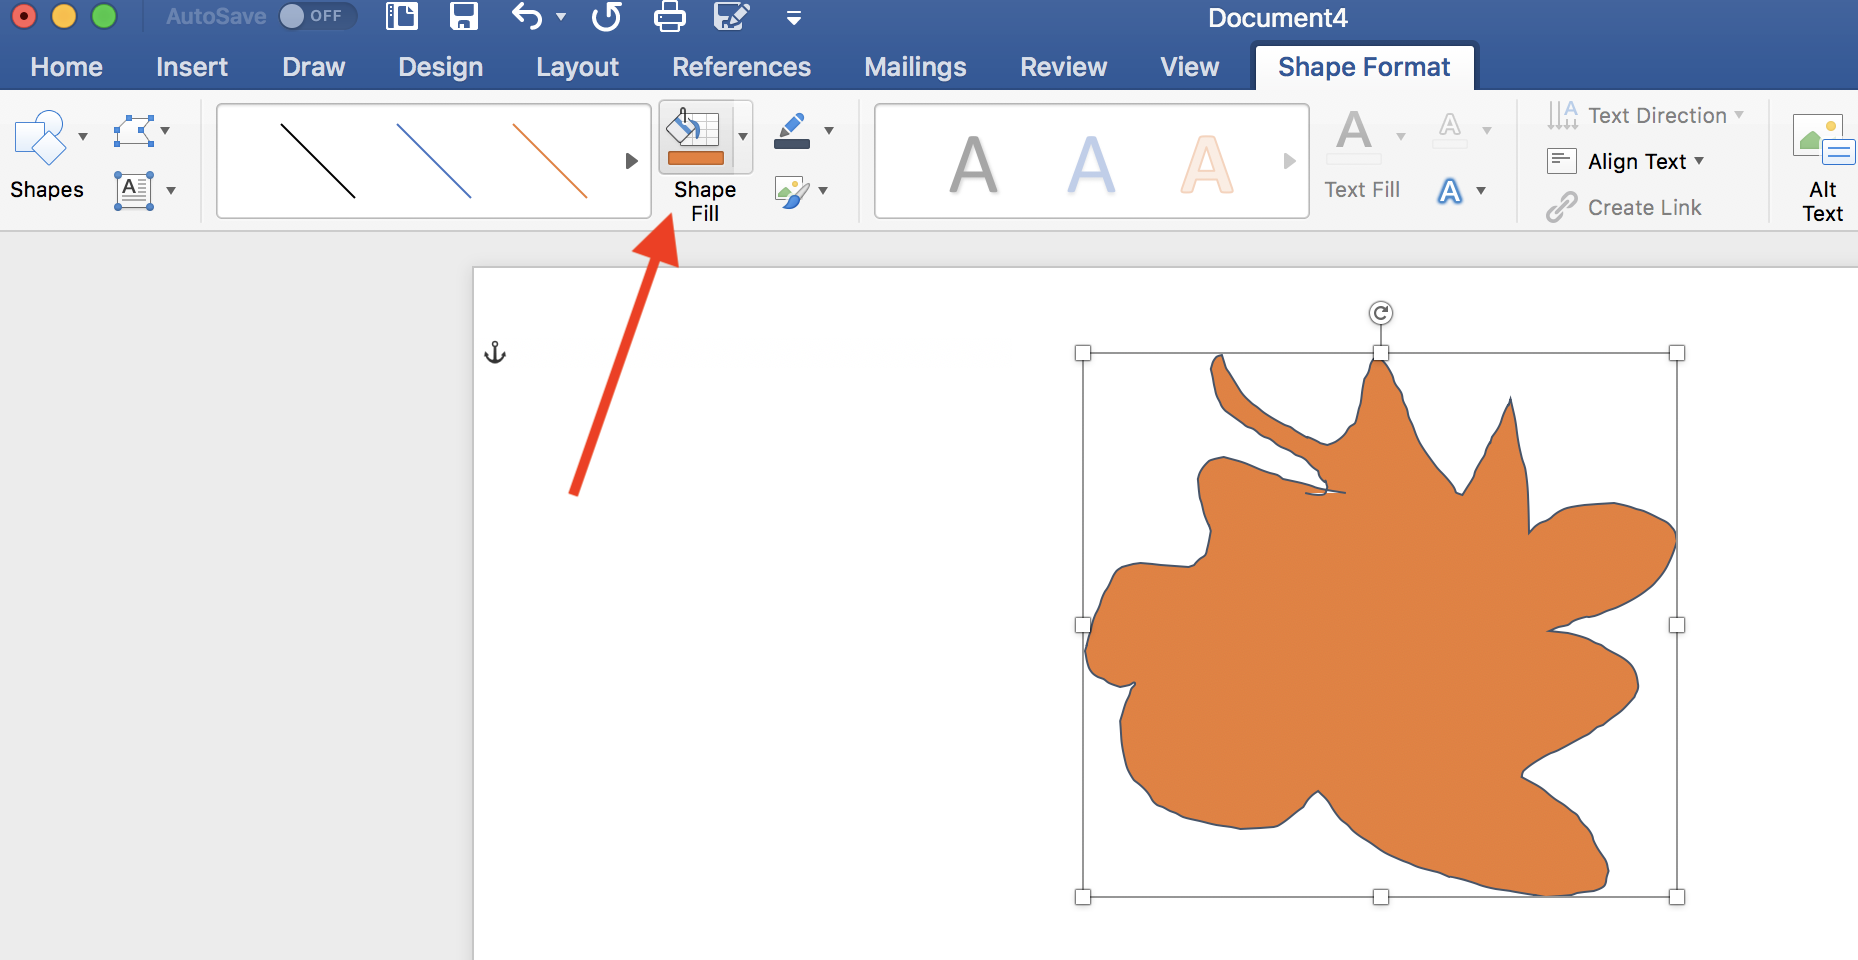 How to Draw in Microsoft Word in 2020